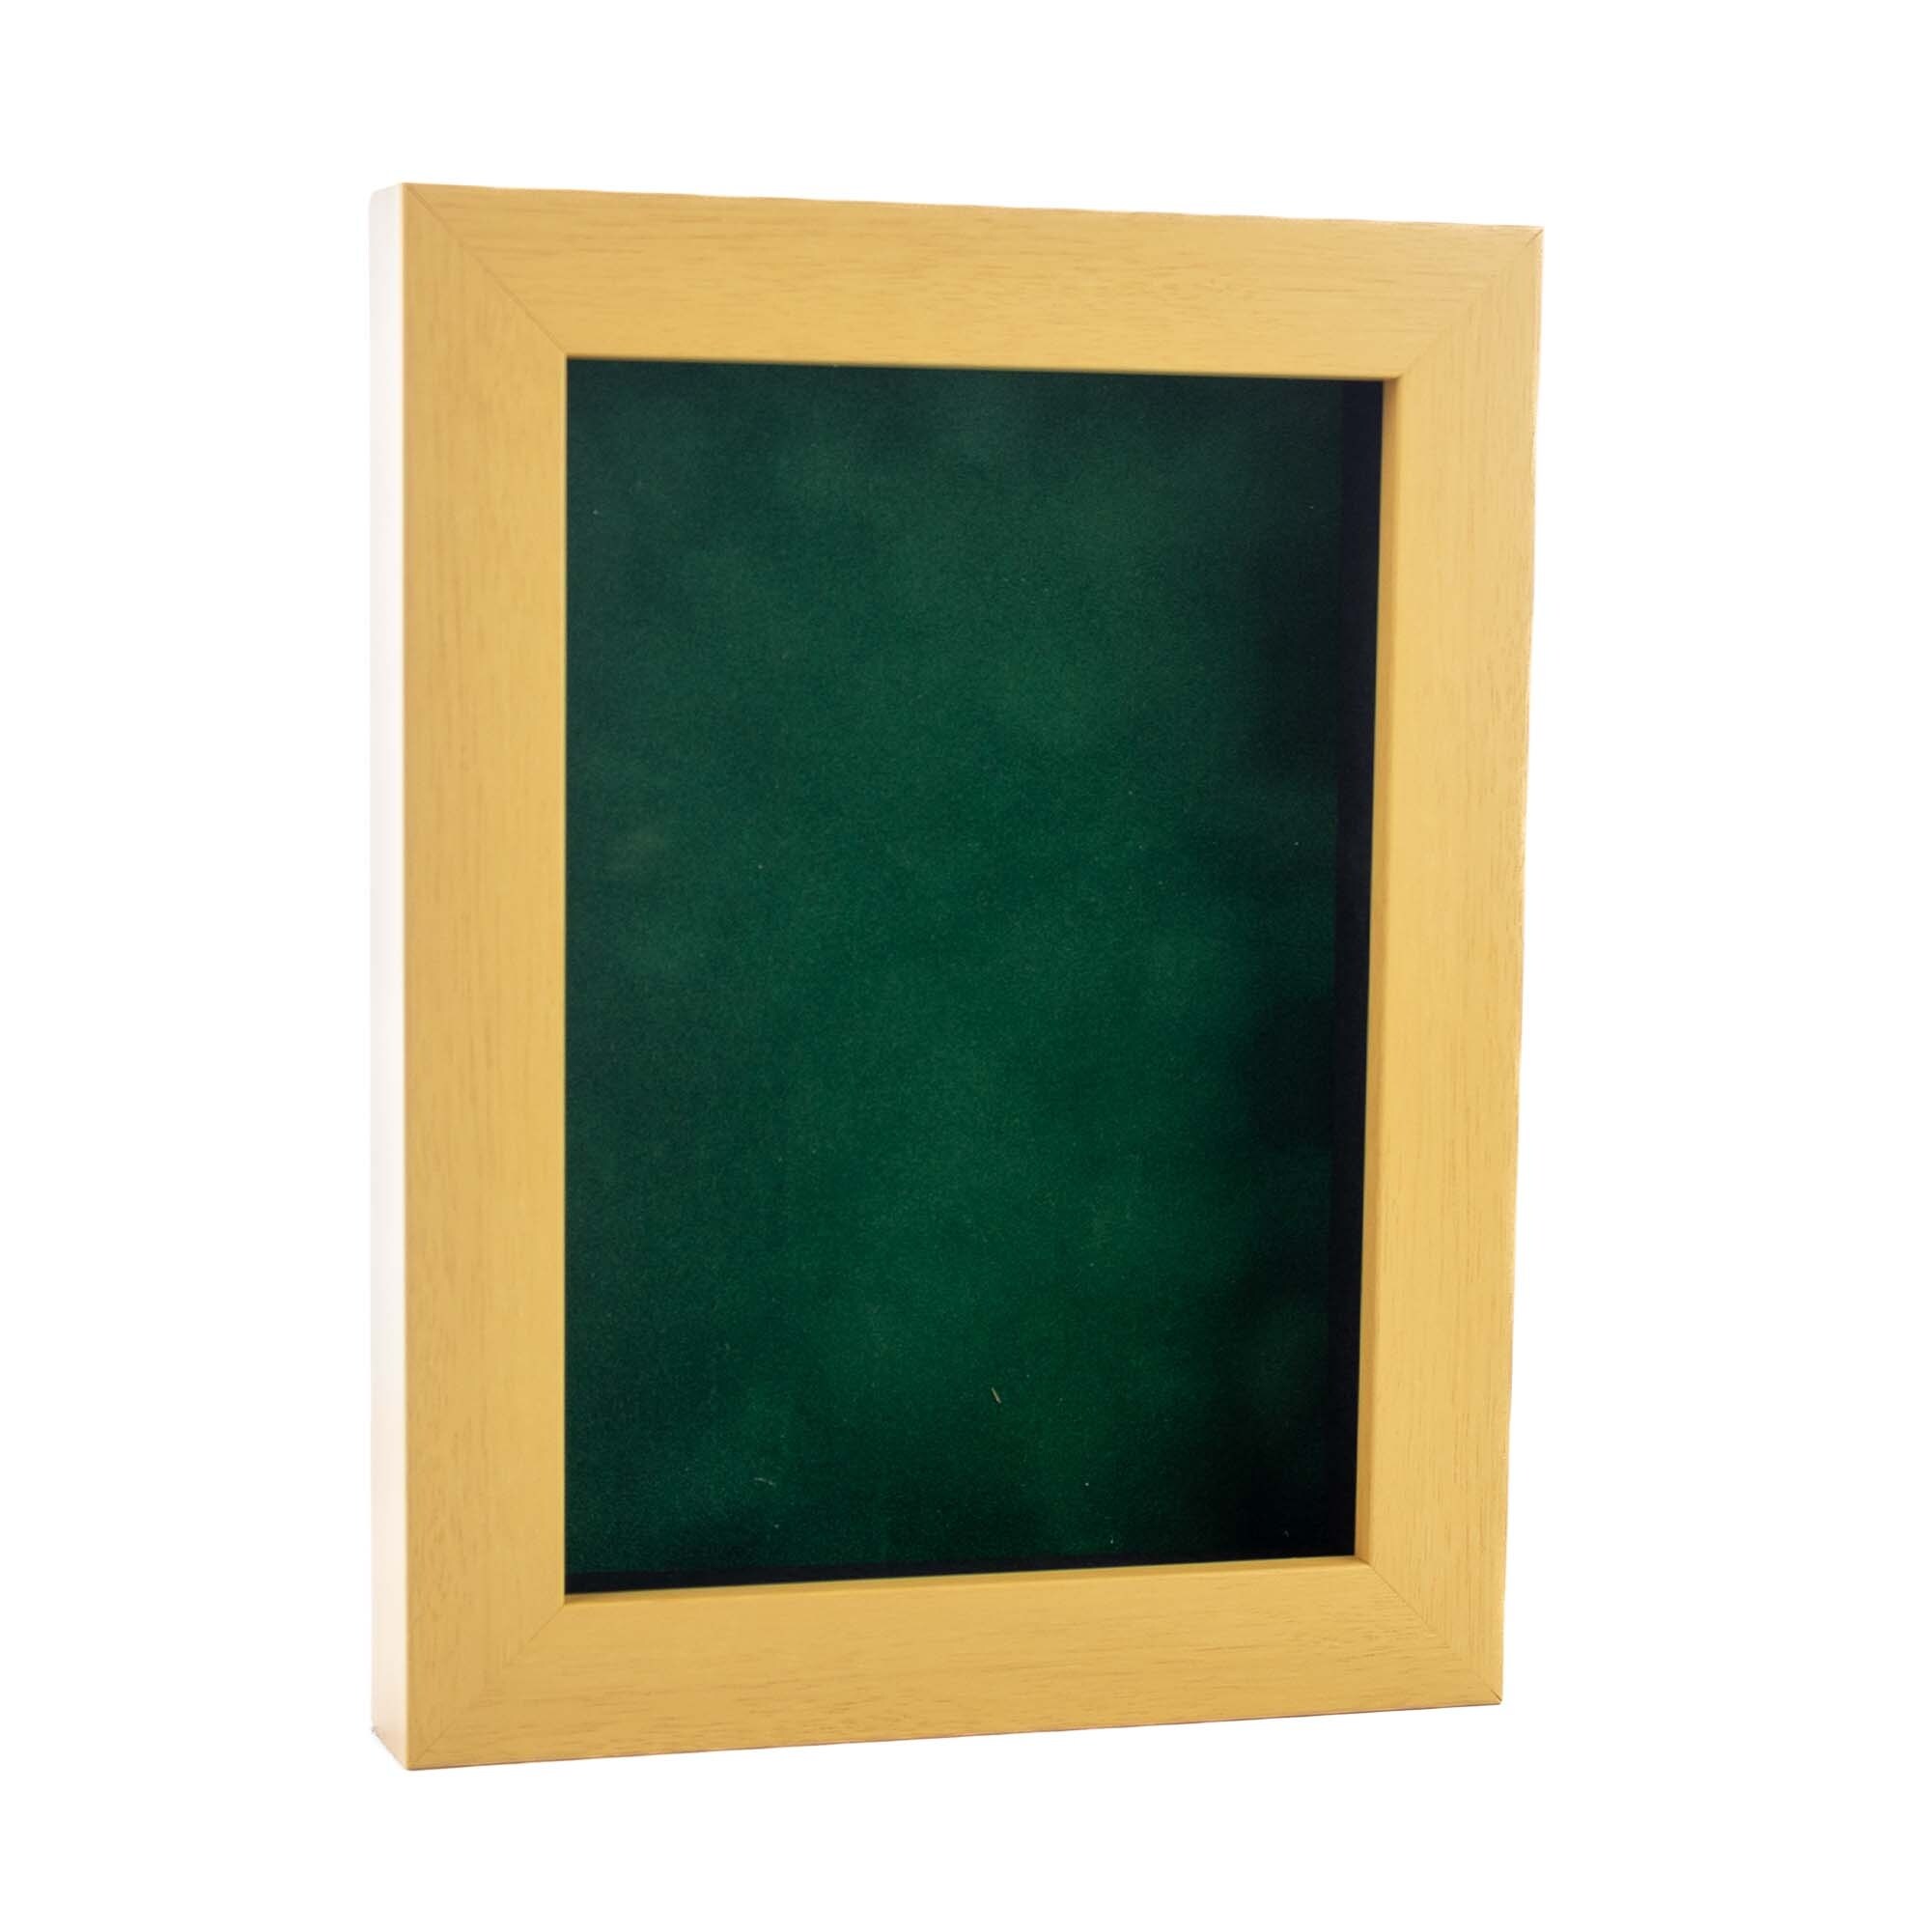 16x24 Natural Shadowbox Frame - Interior Size 16x24 by 1 inch Deep - Natural Frame Is Made to Display Items Up to 1 inch Deep - Brown